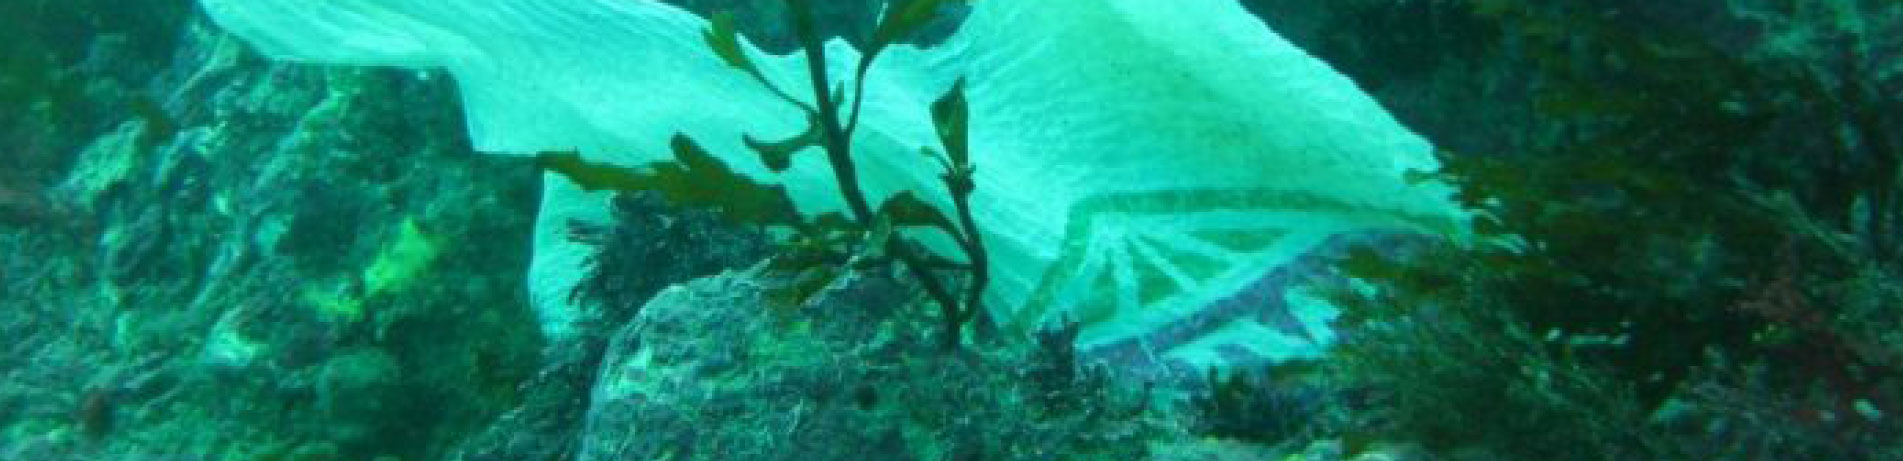 Close up image of a plastic bag on the sea bed